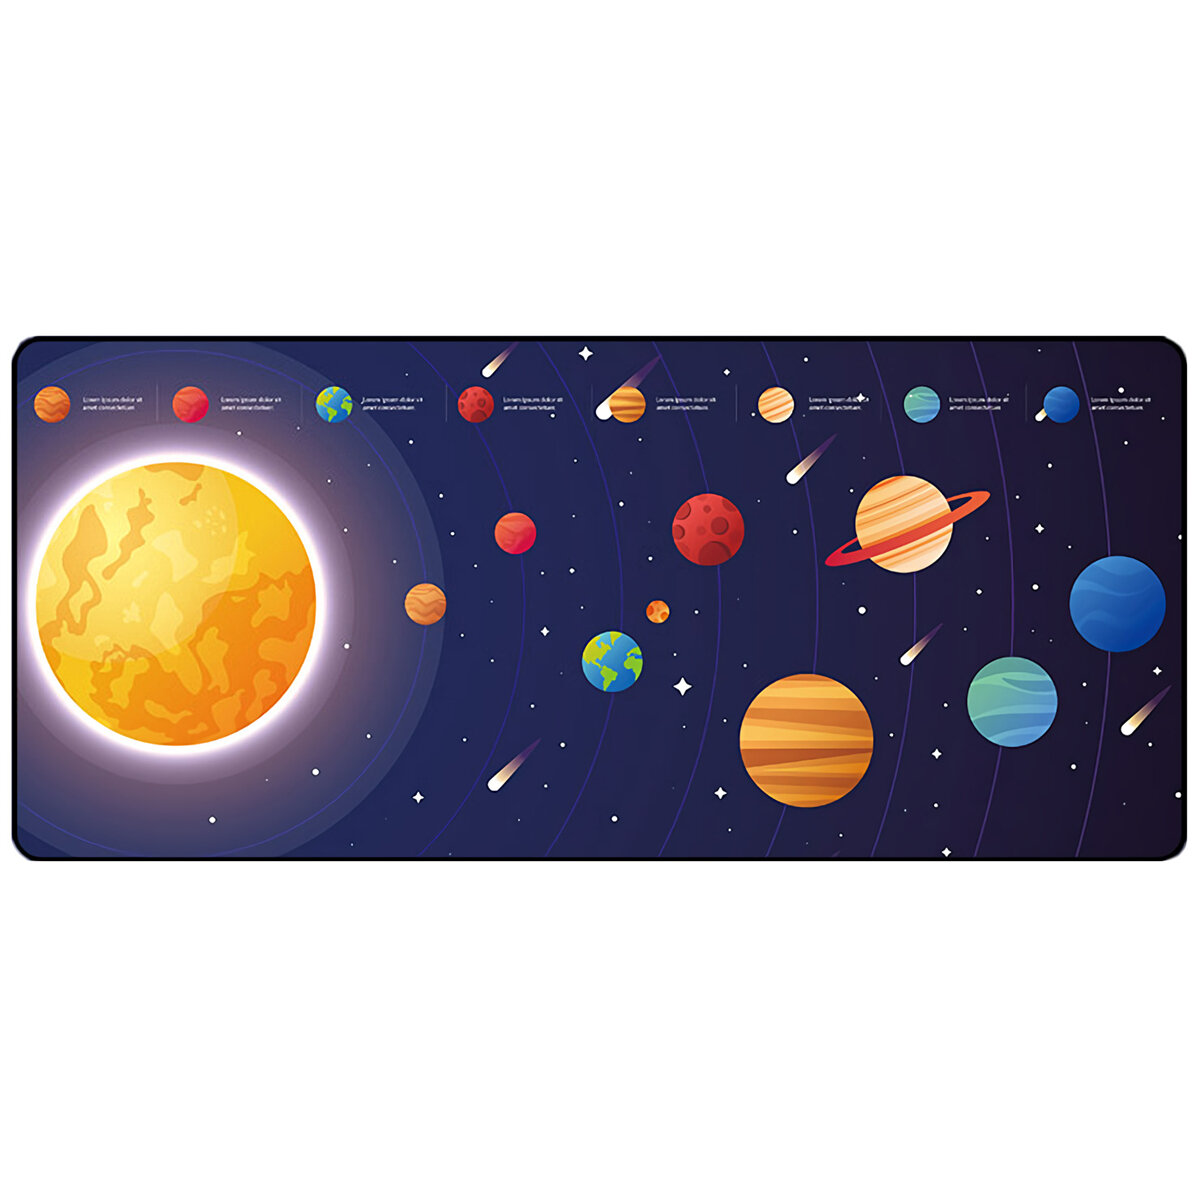 FBB Extra Large Mouse Pad Solar System Anti-slip Rubber Gaming Keyboard Pad 900*400*4mm Desktop Table Protective Mat for